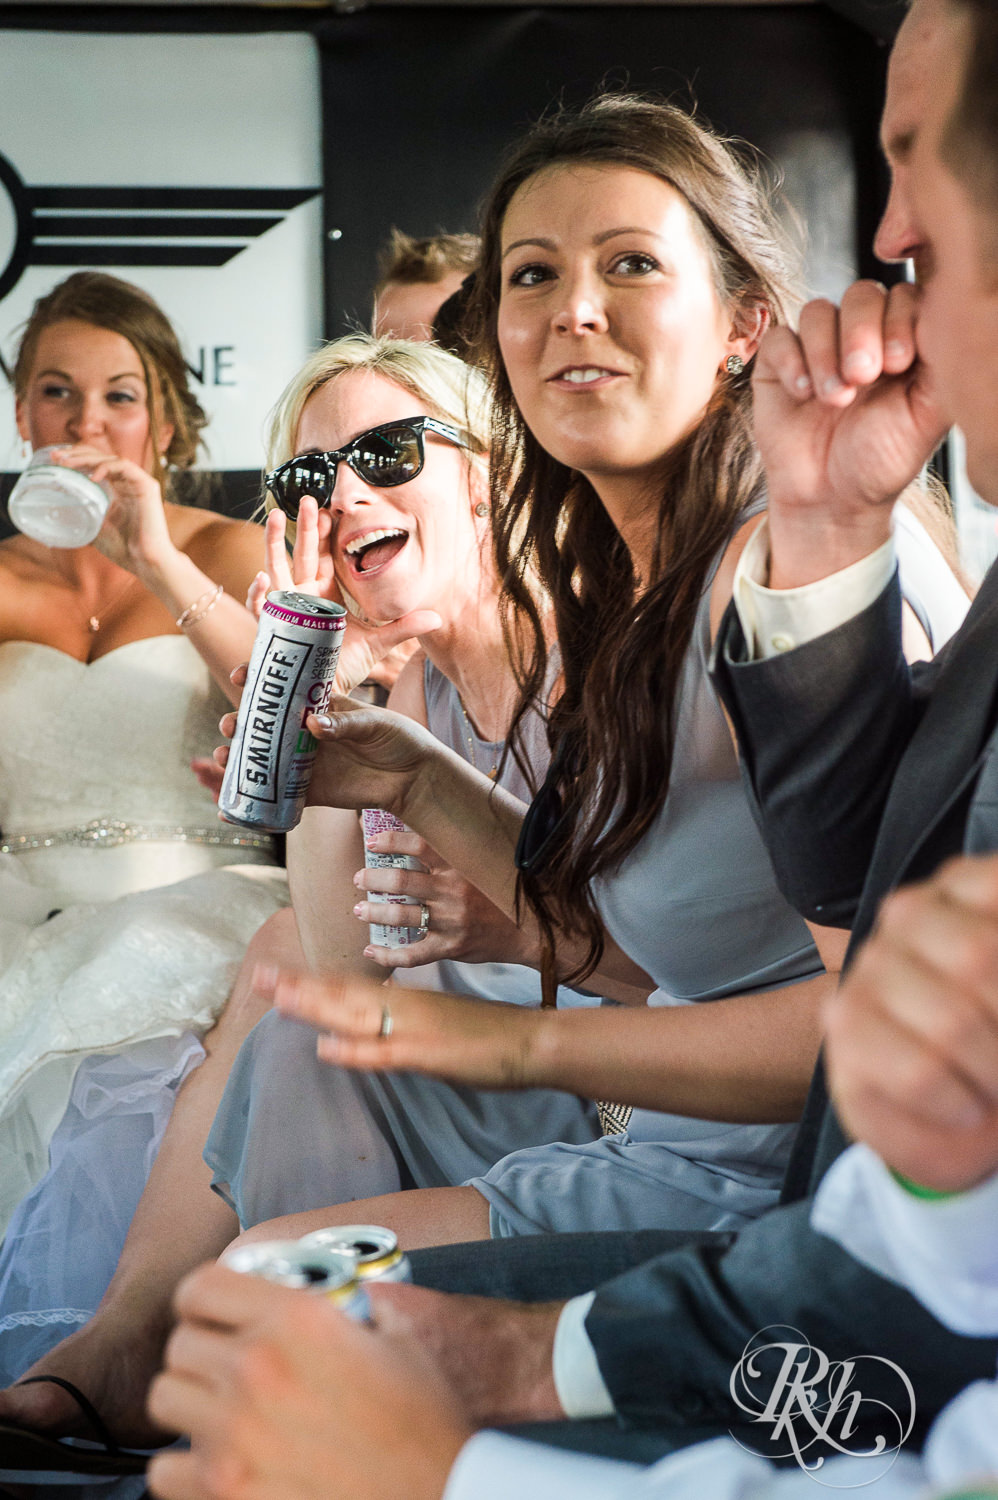 Lesbian brides drink on a party bus in Duluth, Minnesota.